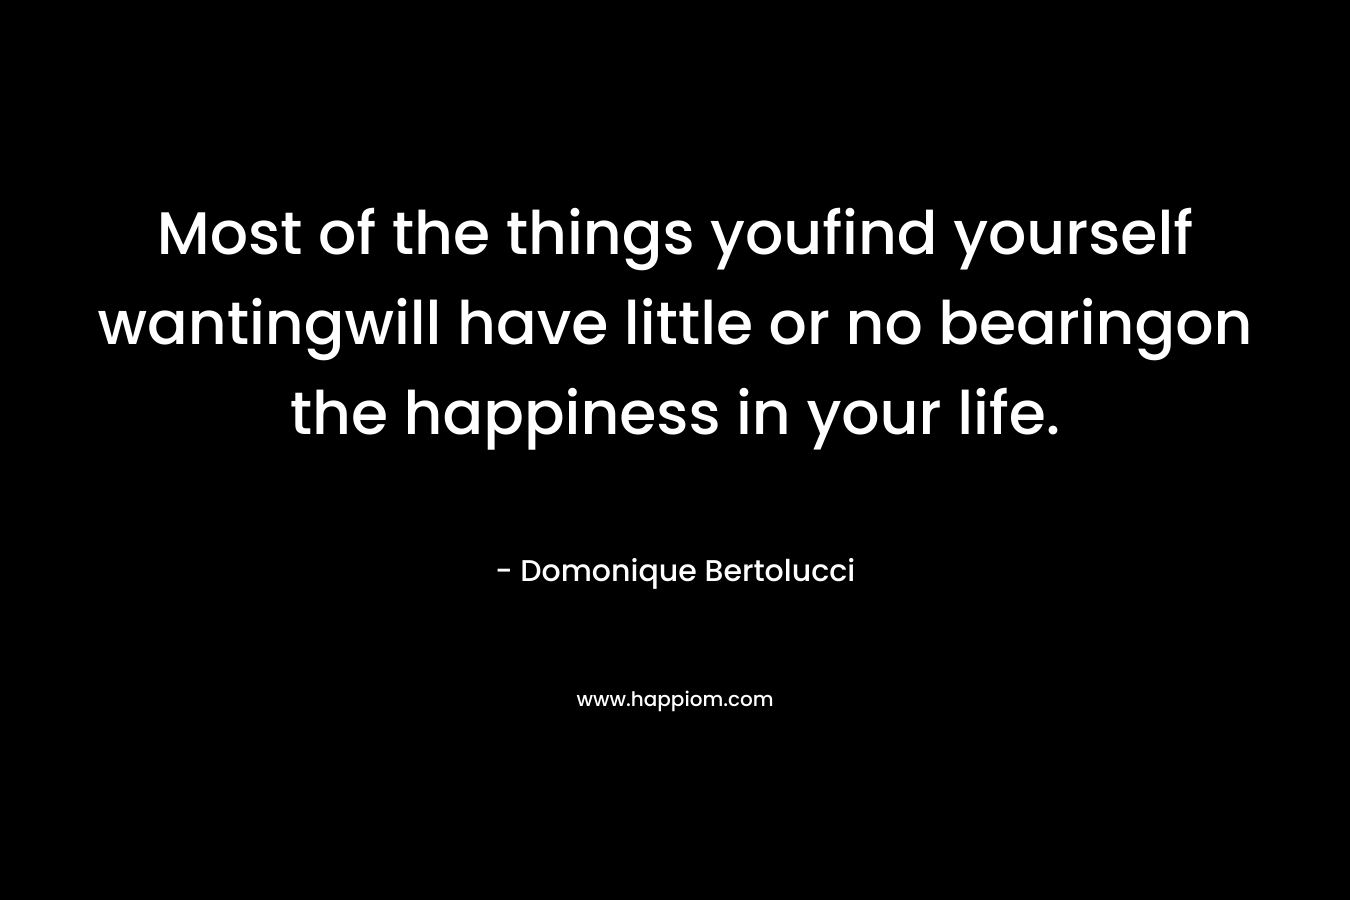 Most of the things youfind yourself wantingwill have little or no bearingon the happiness in your life.